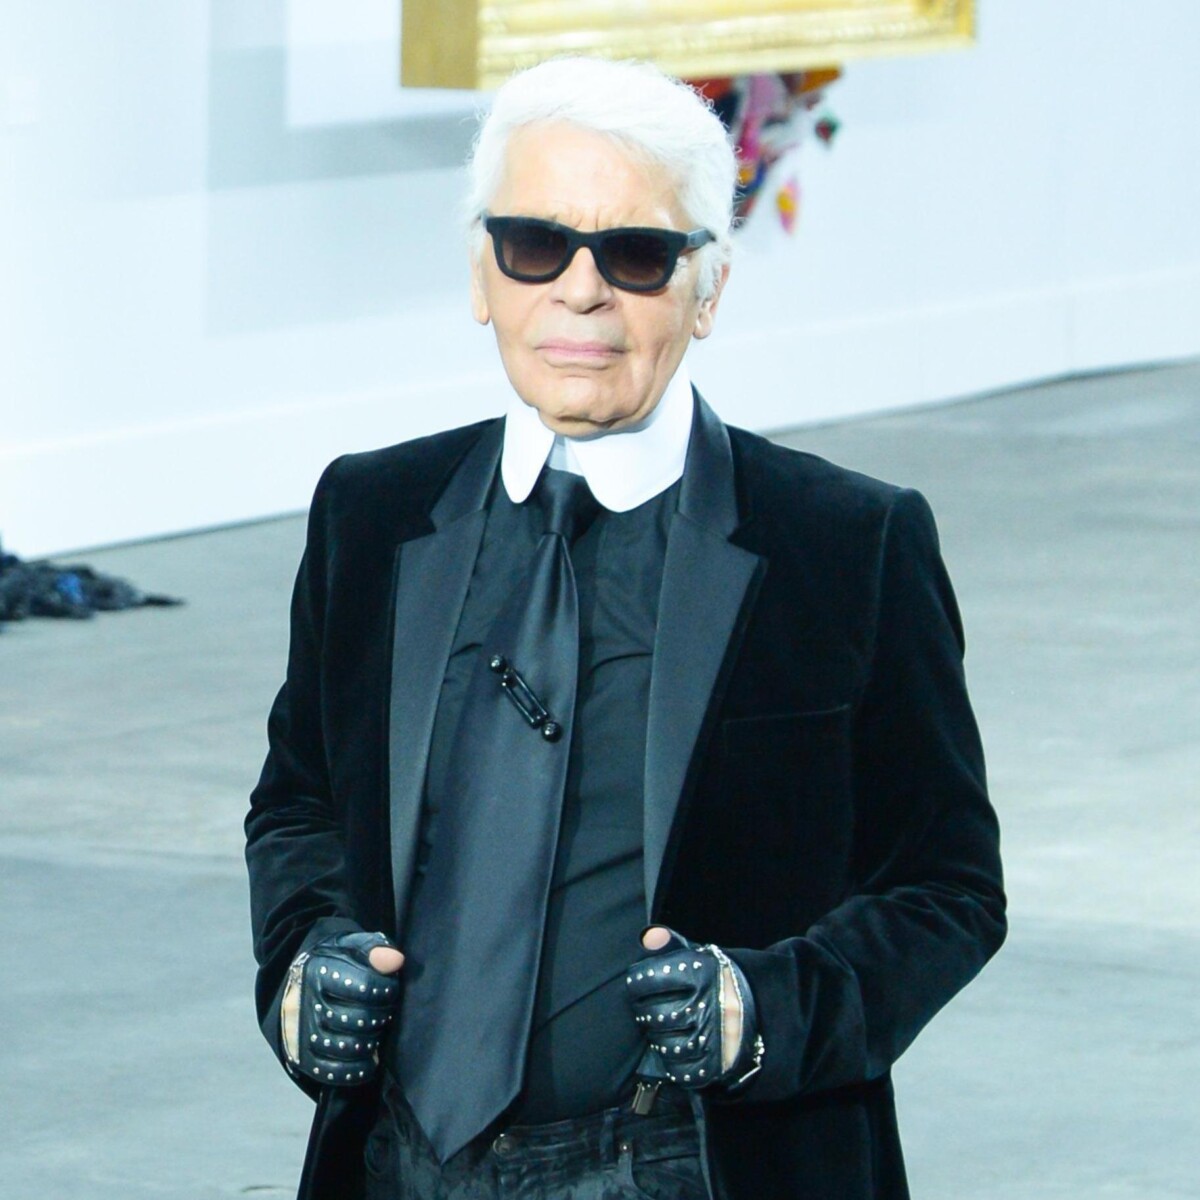 Karl Lagerfeld is the Subject of The Met's Next Major Fashion